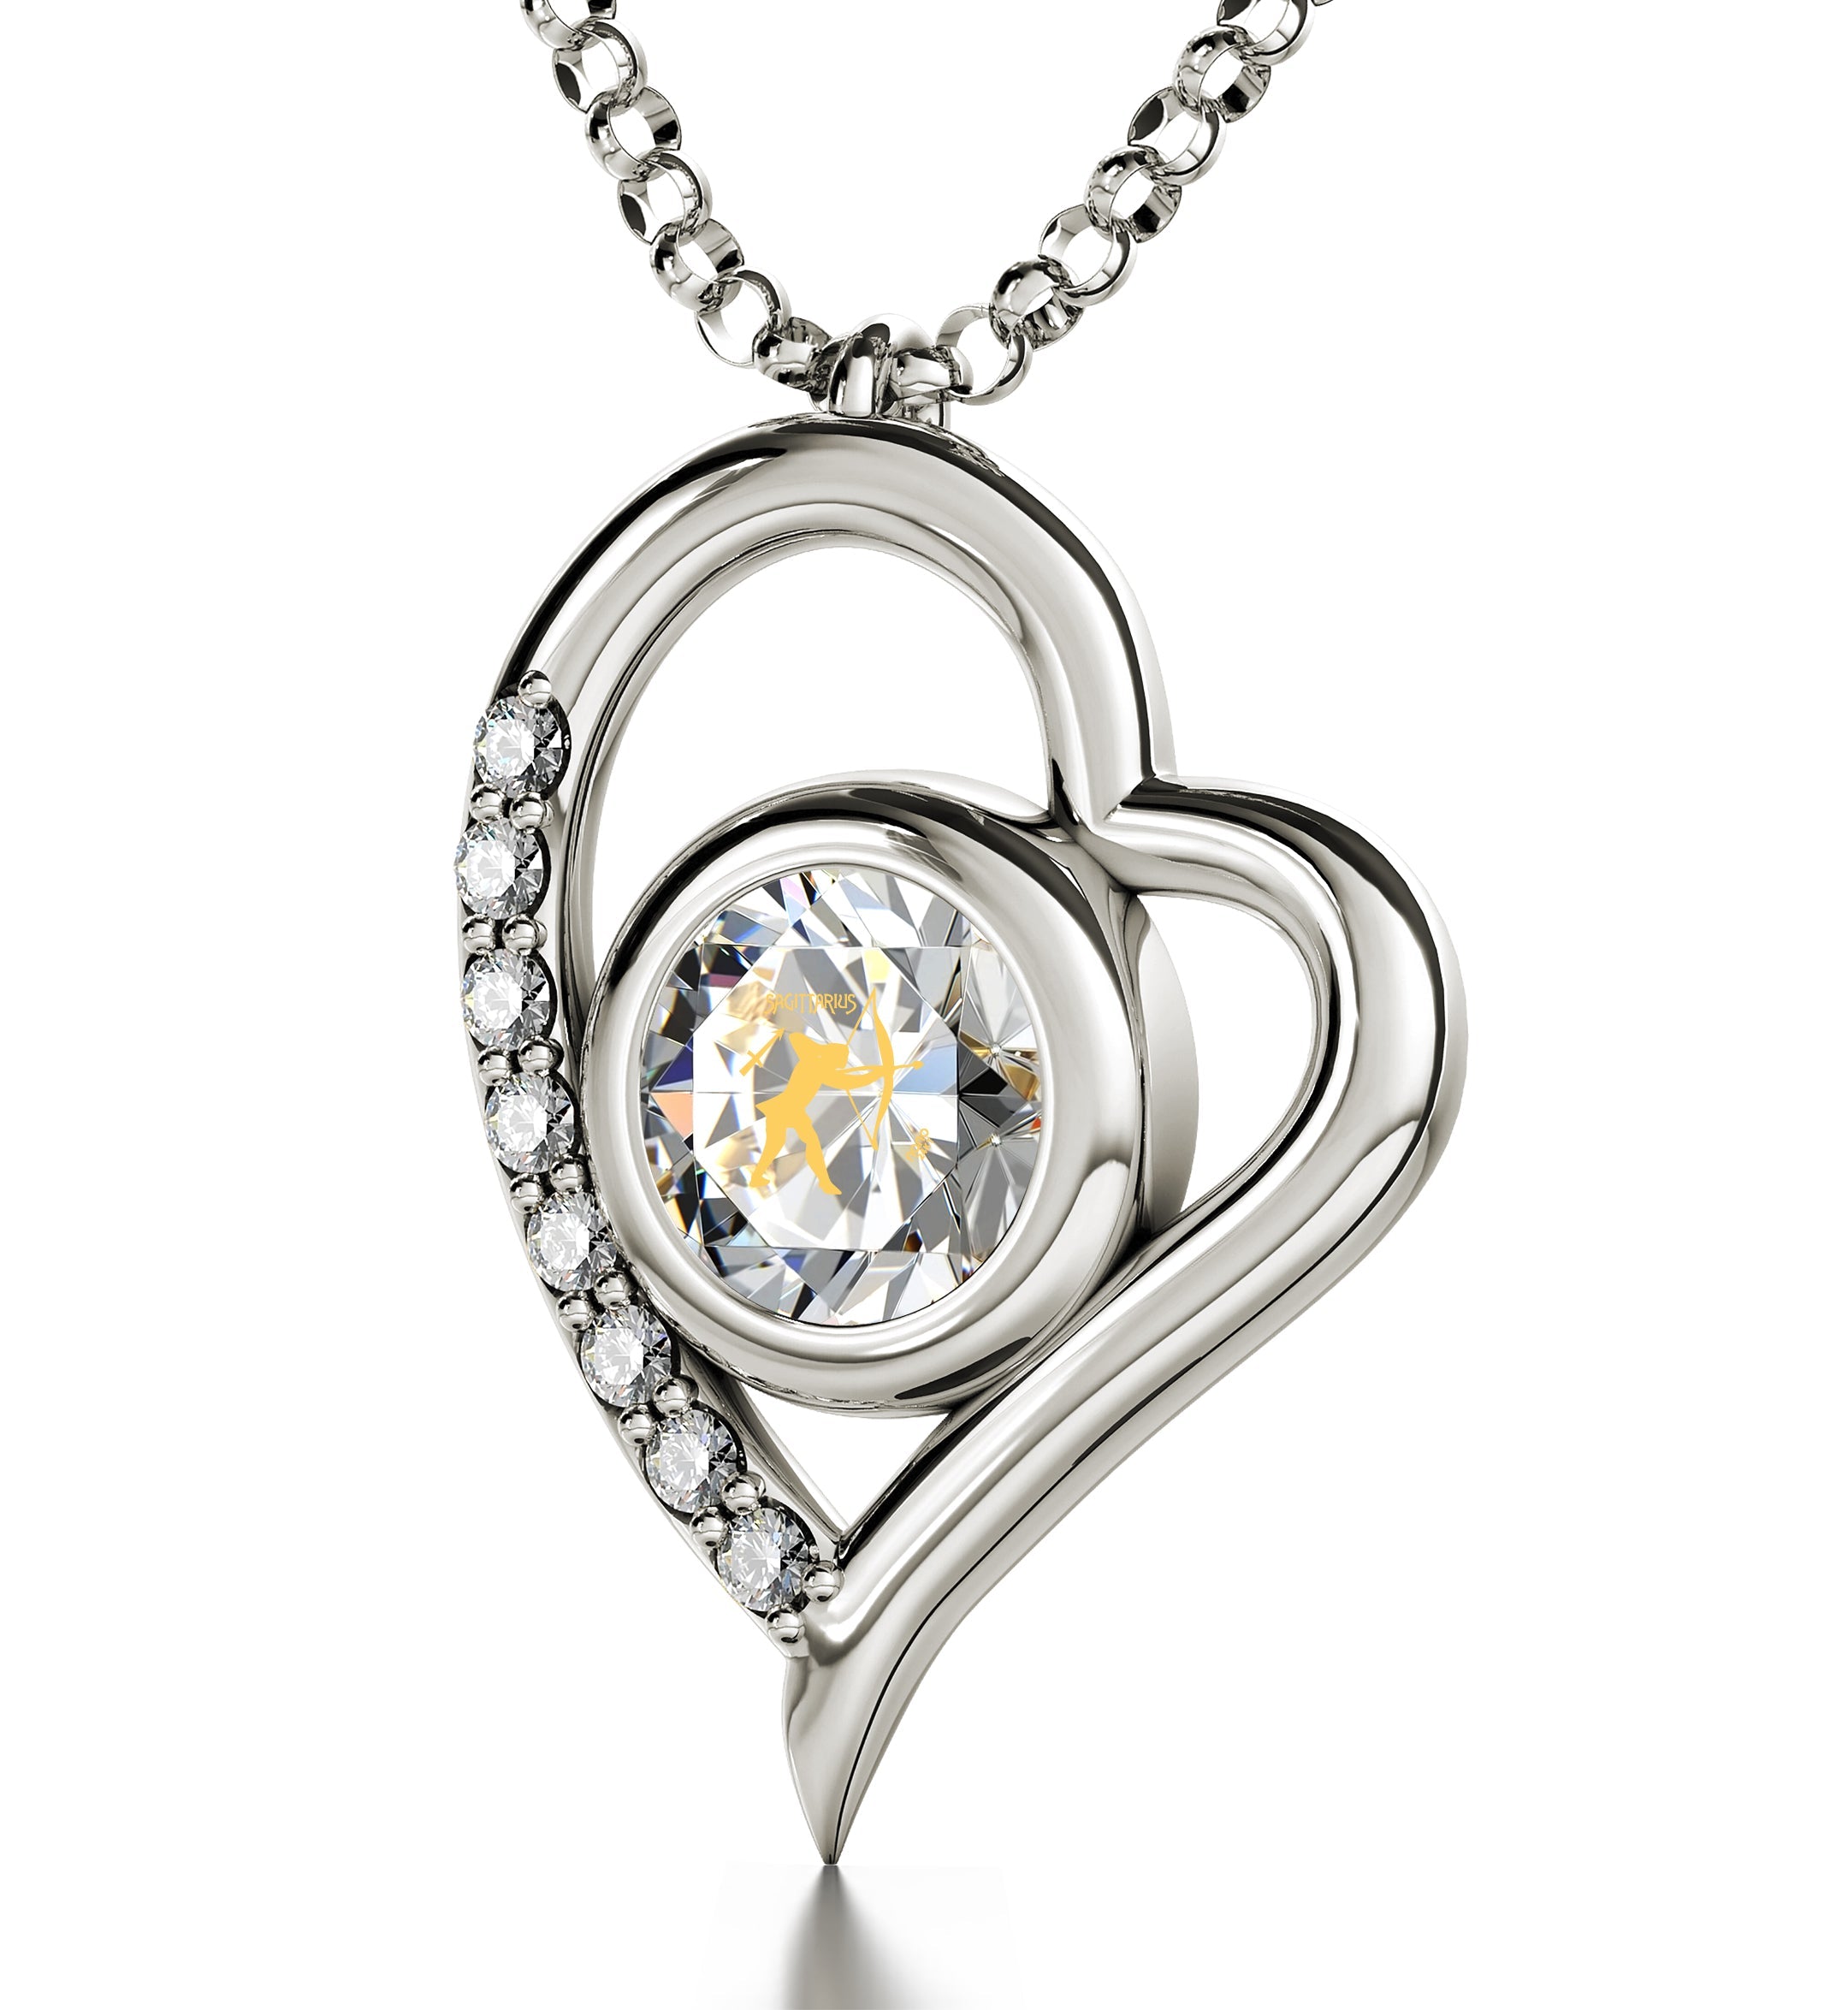 A 925 Sterling Silver Sagittarius Necklace Zodiac Heart Pendant with rhinestone embellishments, displayed against a white background.